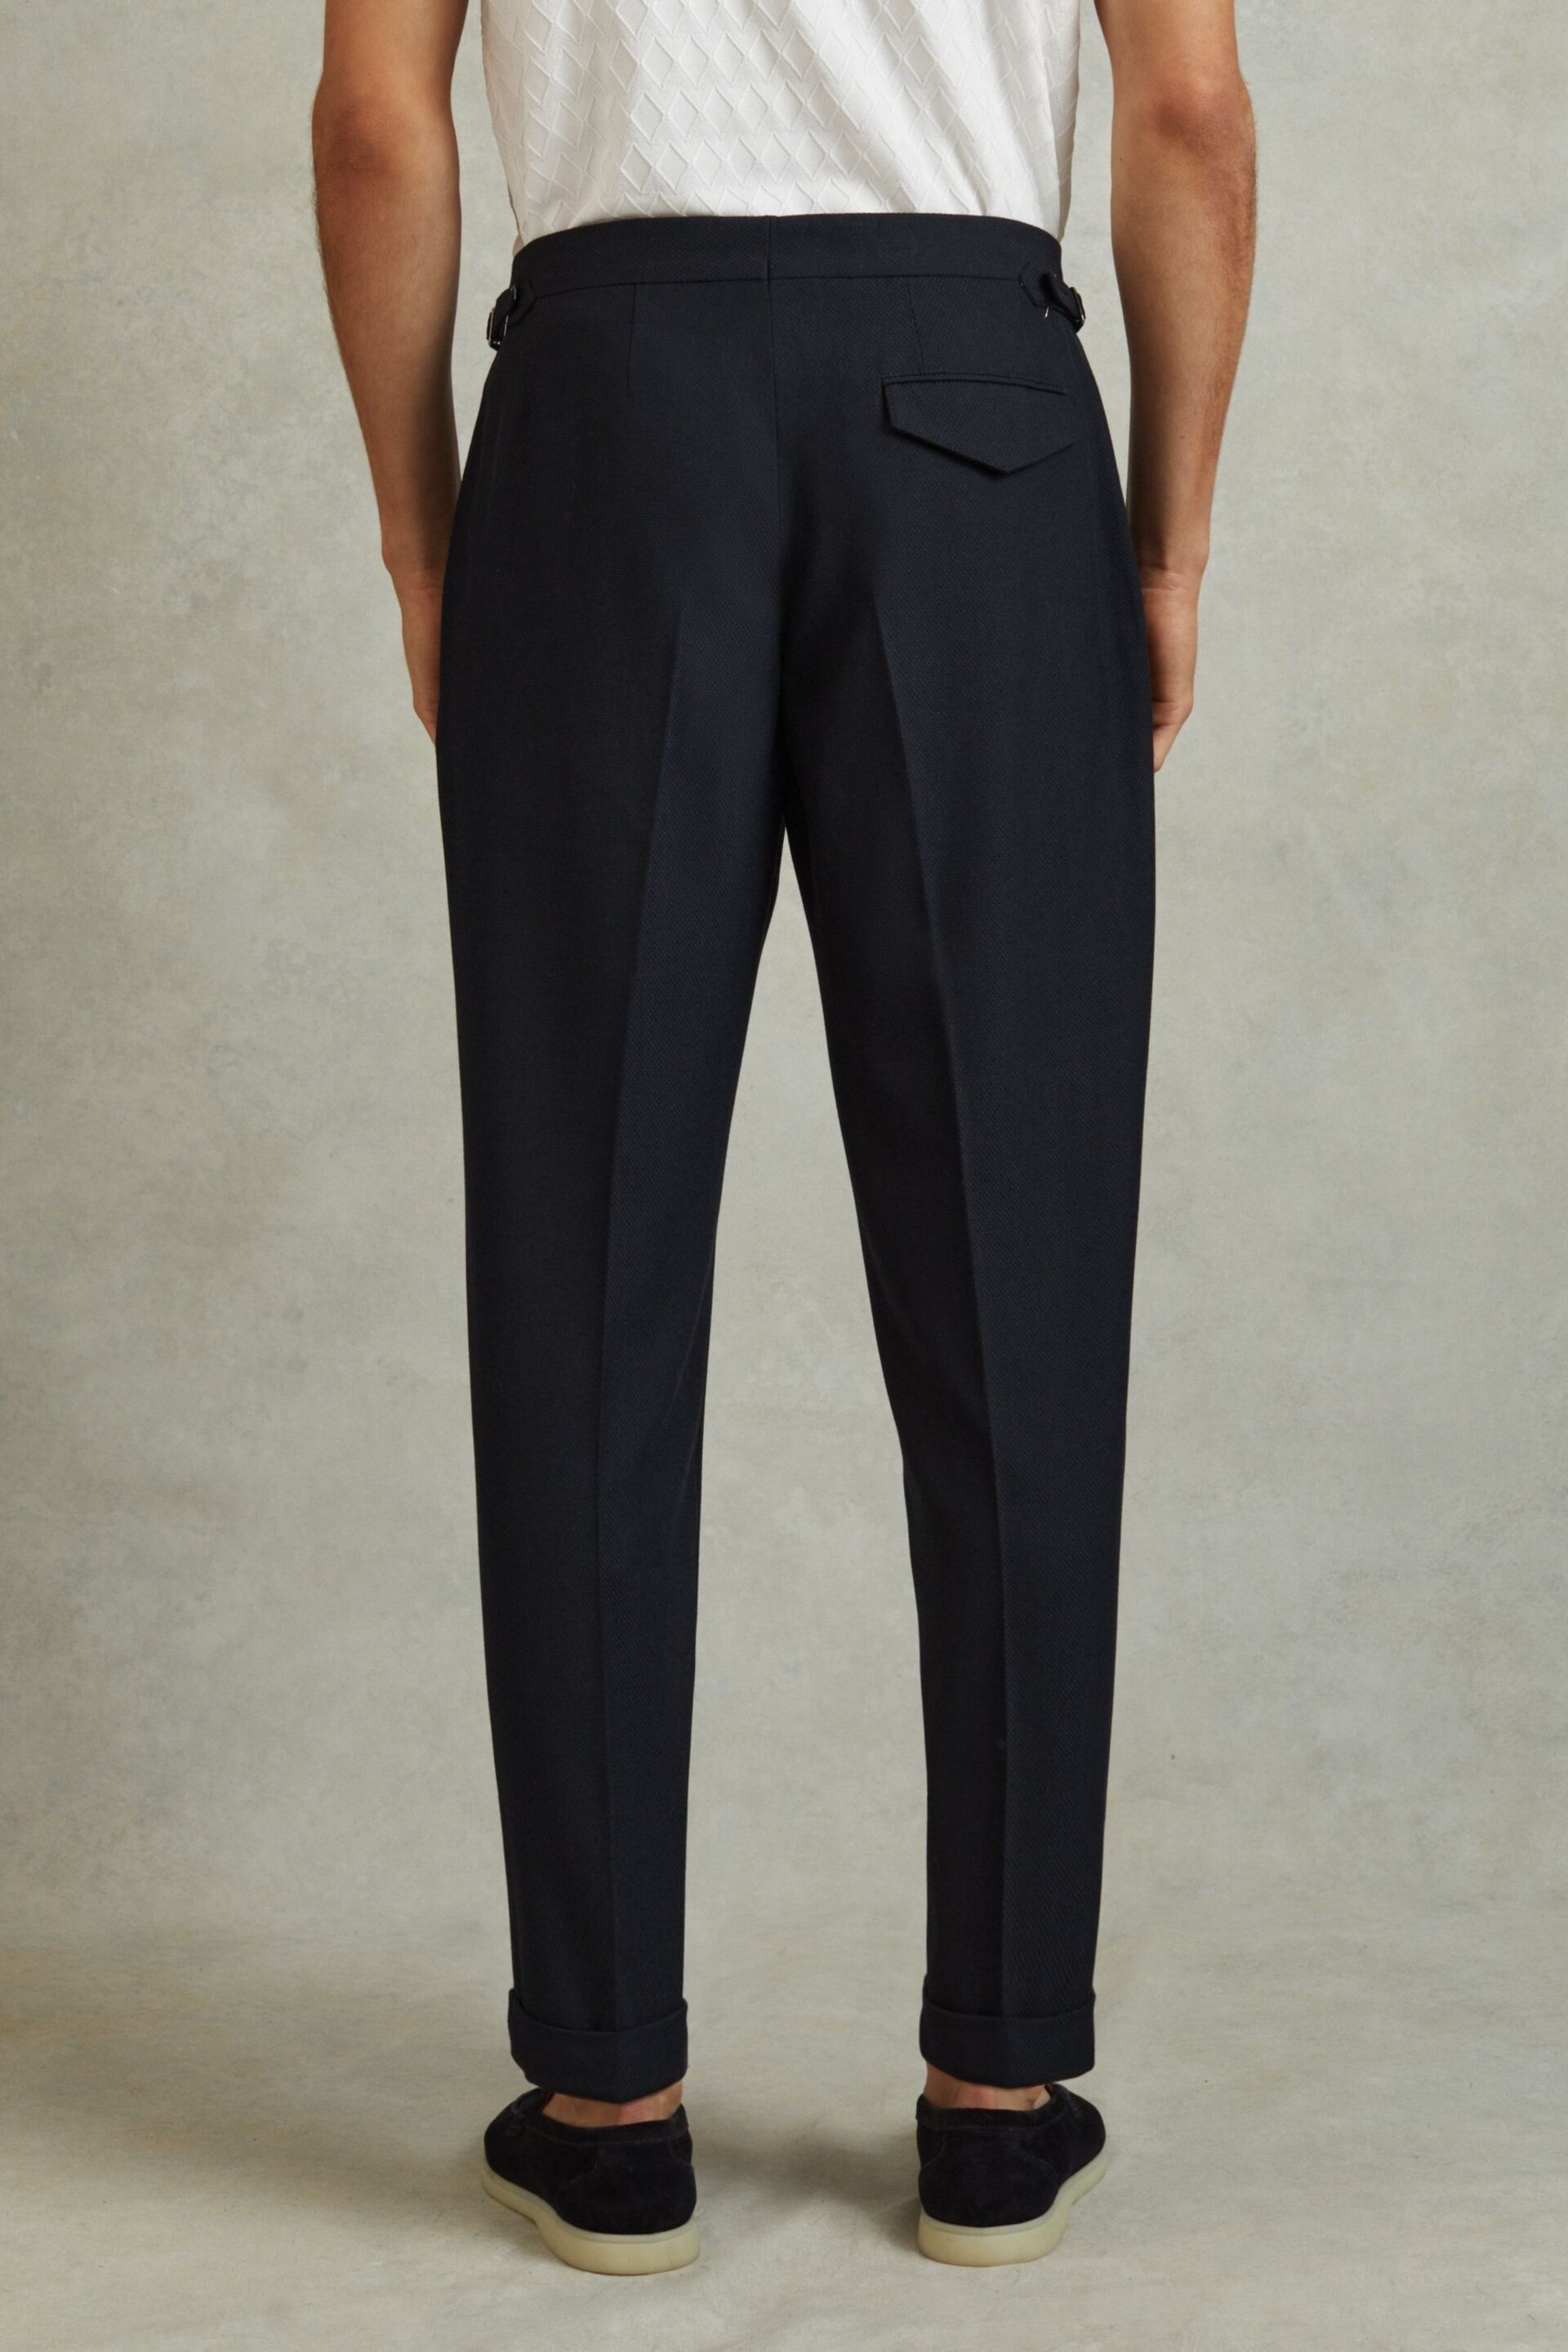 Reiss Navy Bridge Textured Side Adjuster Trousers with Turn-Ups - Image 4 of 5